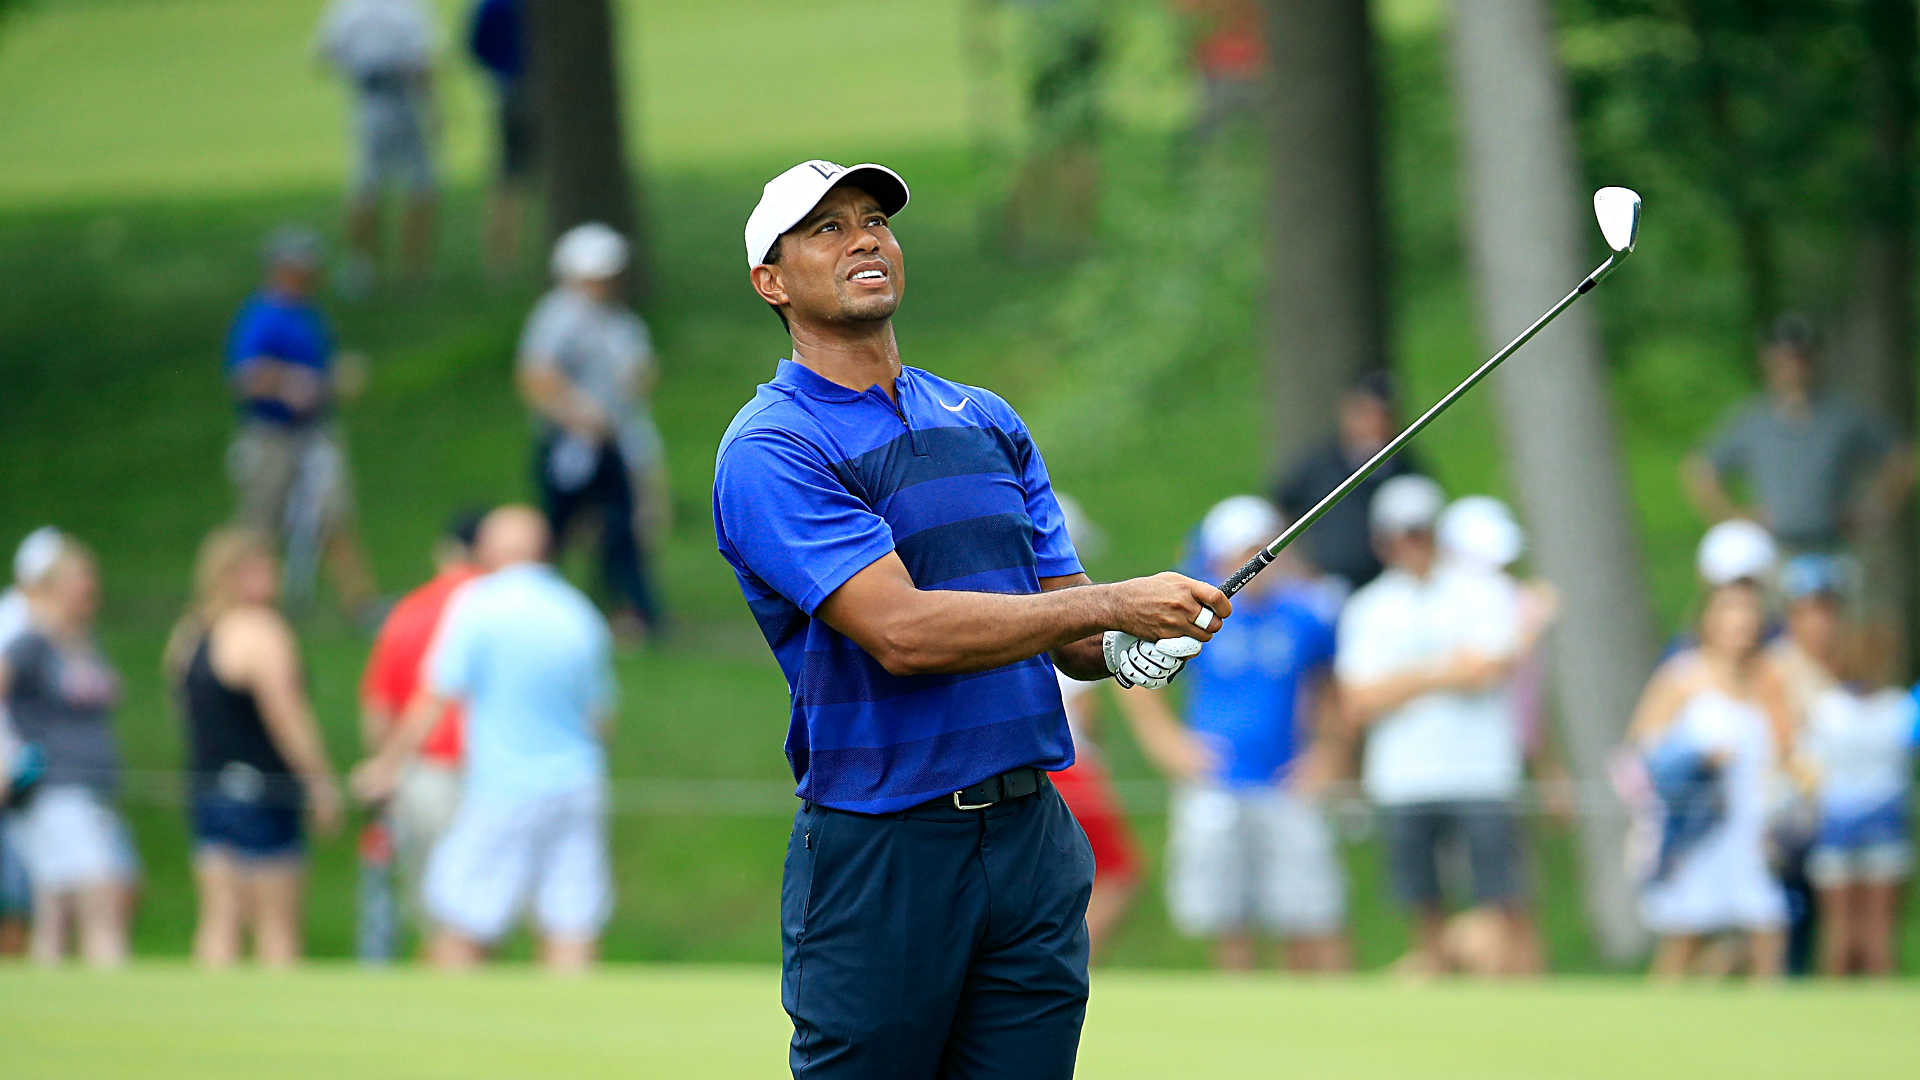 Tiger Woods score: Round 2 updates, leaderboard from Memorial Tournament | Golf ...